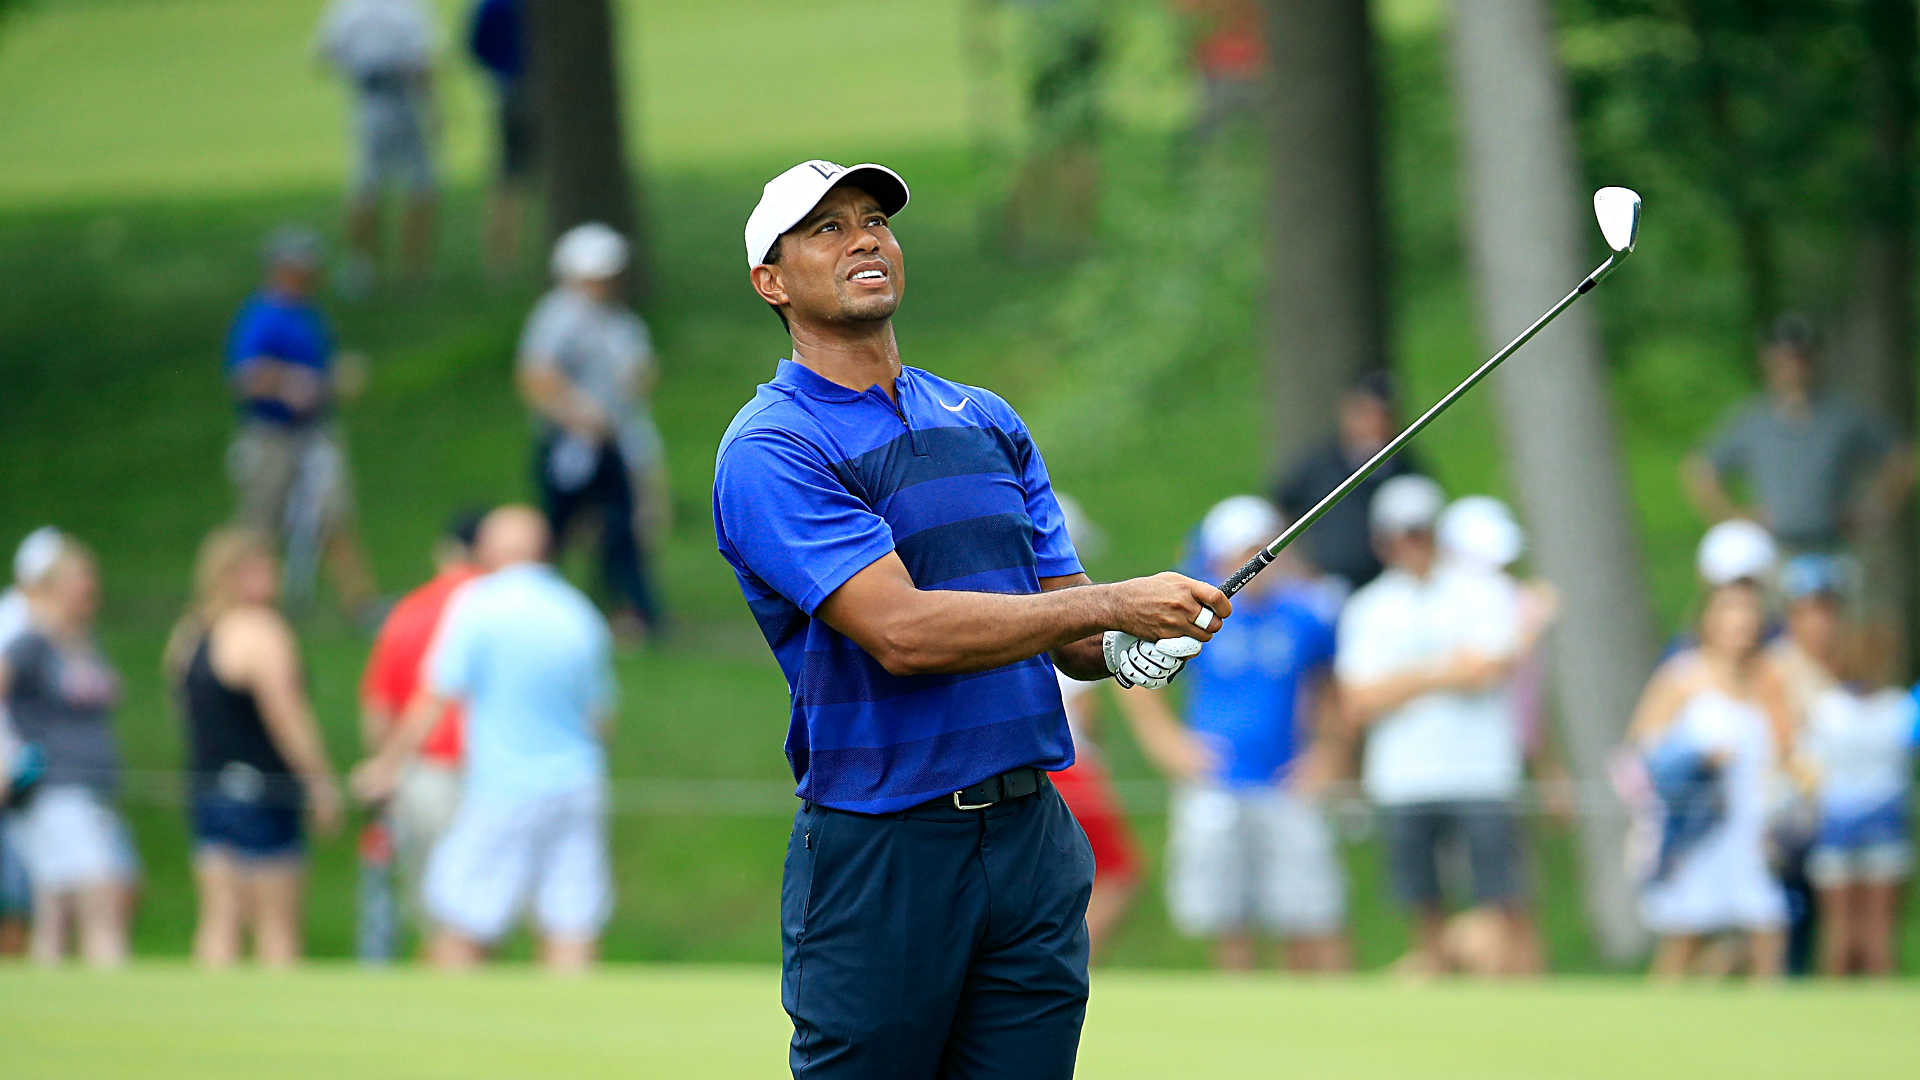 Tiger Woods score: Round 2 updates, leaderboard from Memorial Tournament | Golf ...